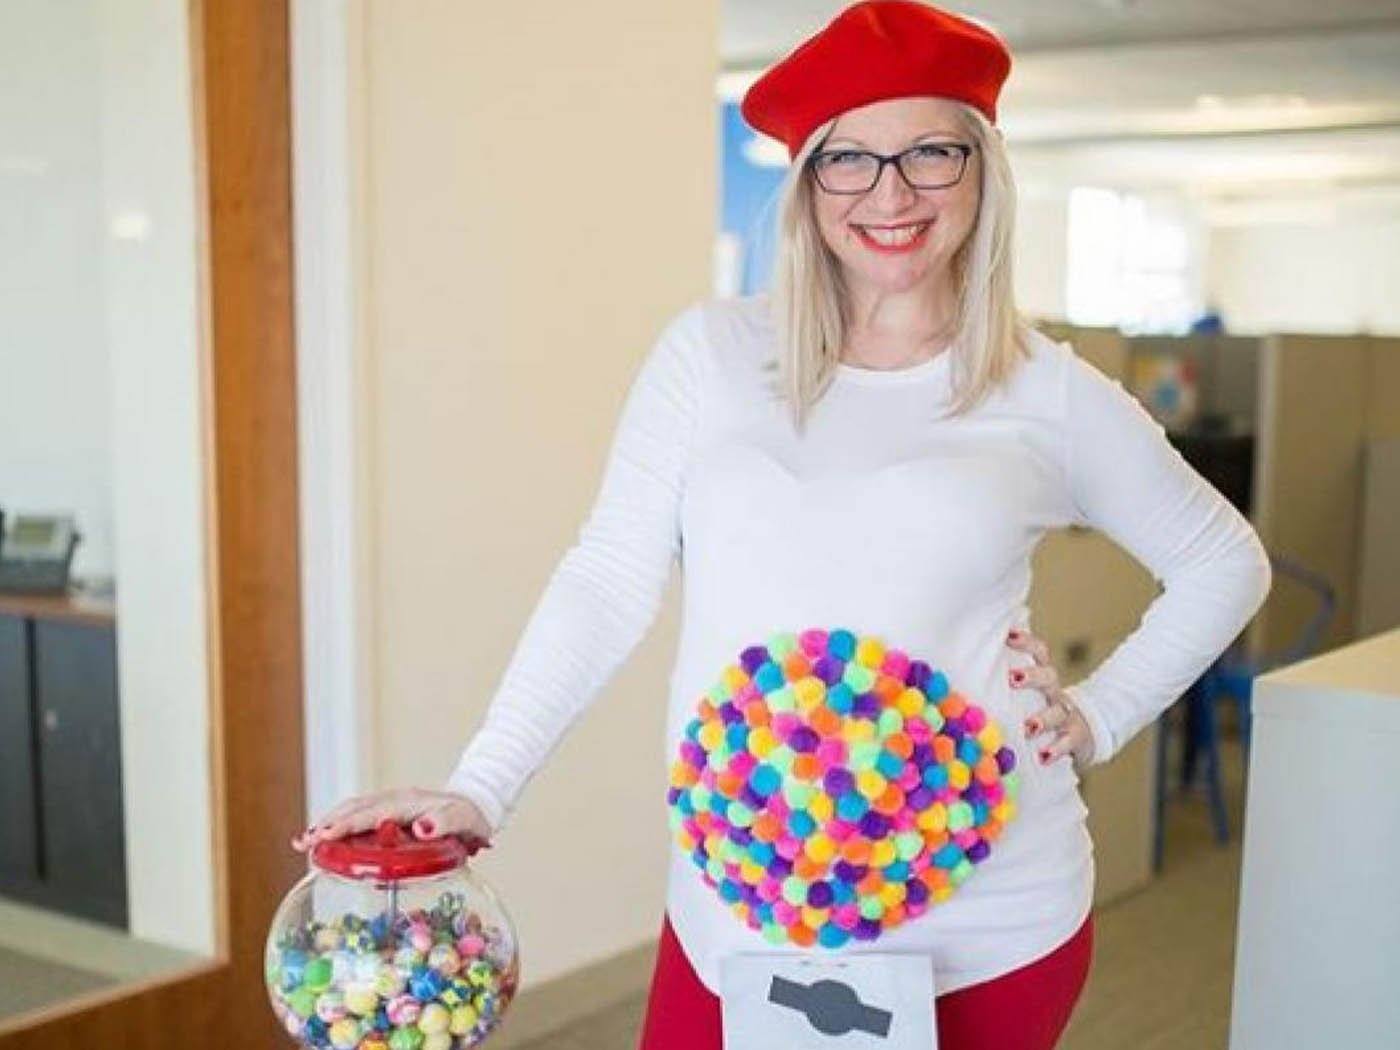 You are currently viewing Pregnant Costume Ideas: Rock Your Bump with Creative Outfits